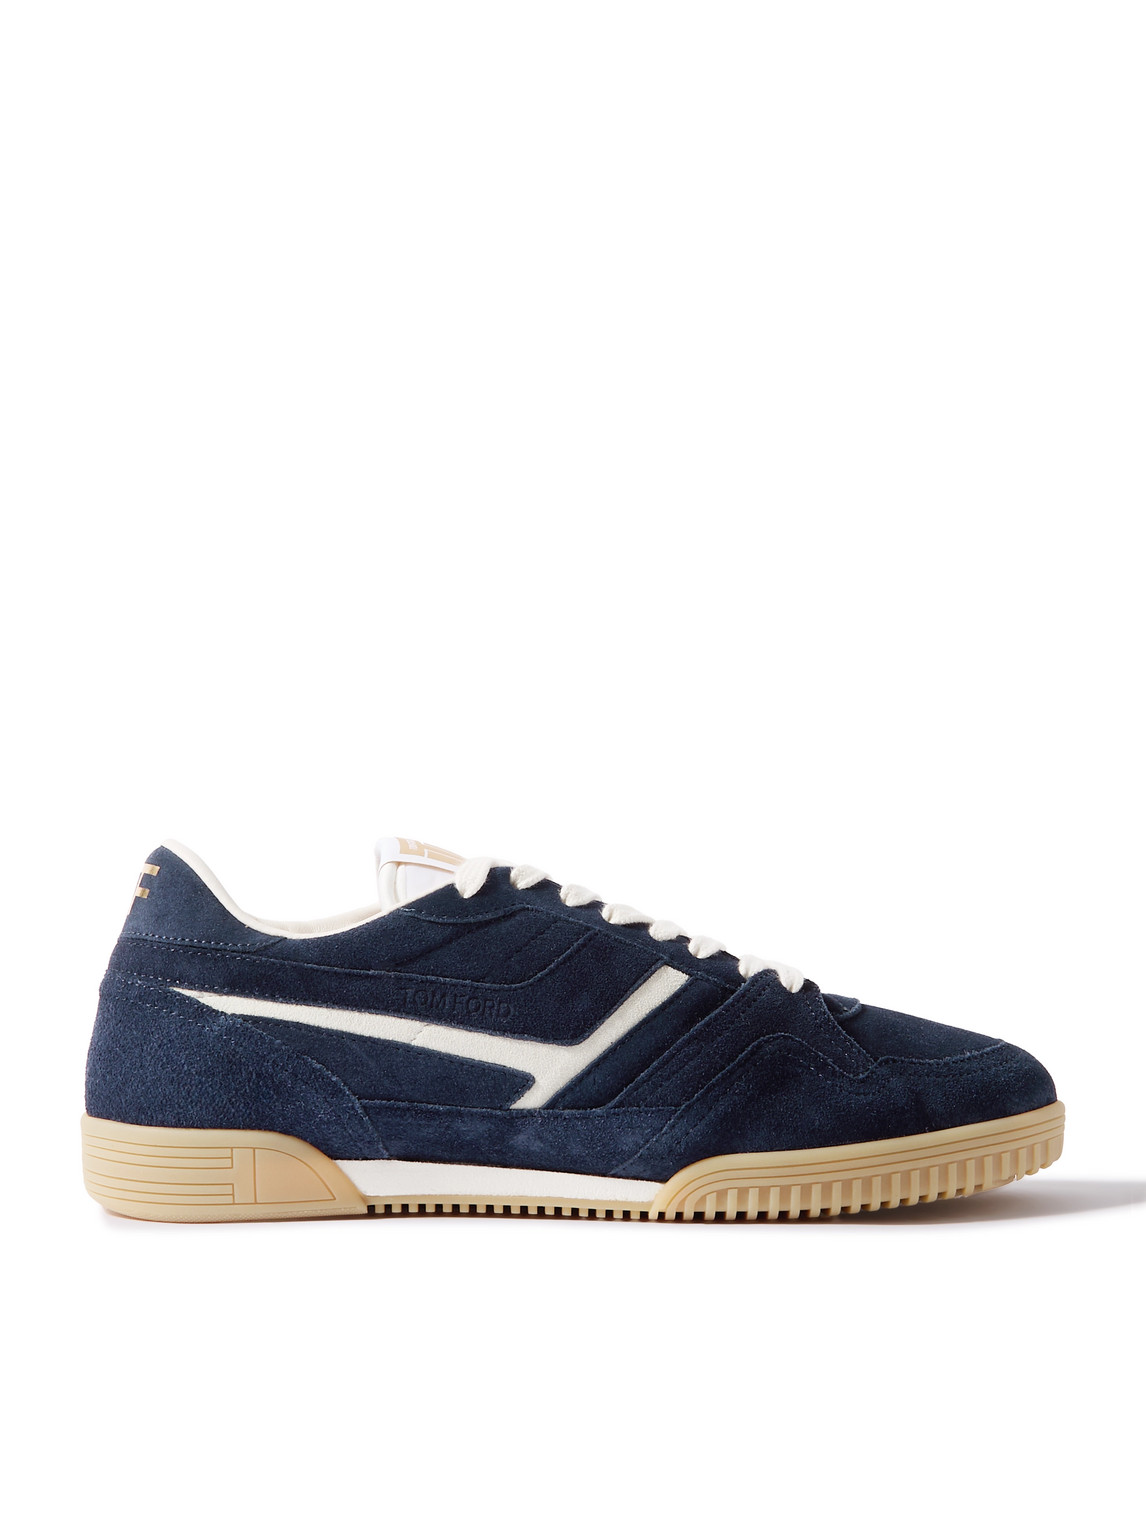 Tom Ford Jackson Suede Sneakers In Blue